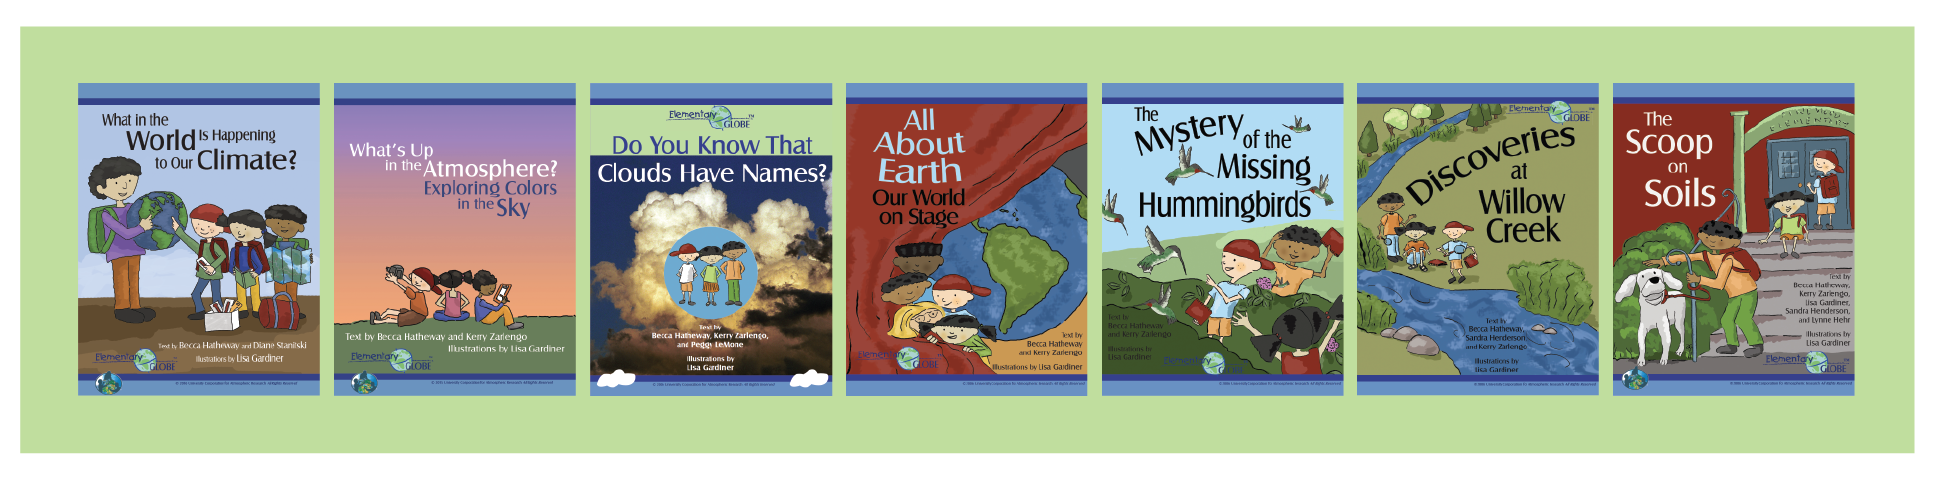 Covers of the Elementary GLOBE storybooks